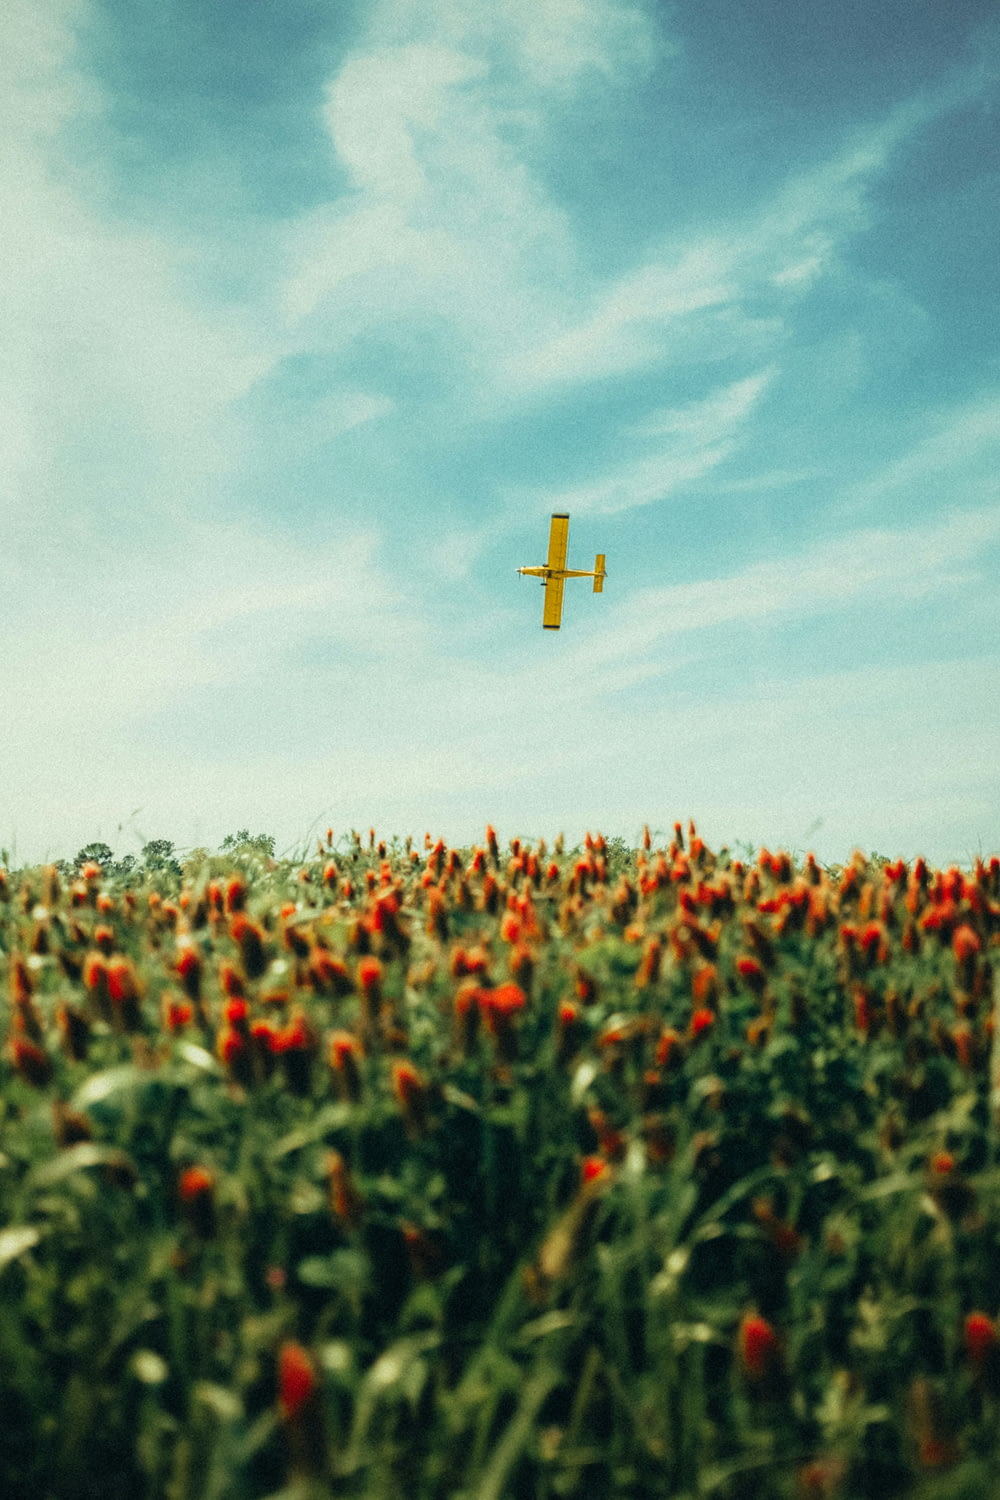 an airplane flying over a field of flowers